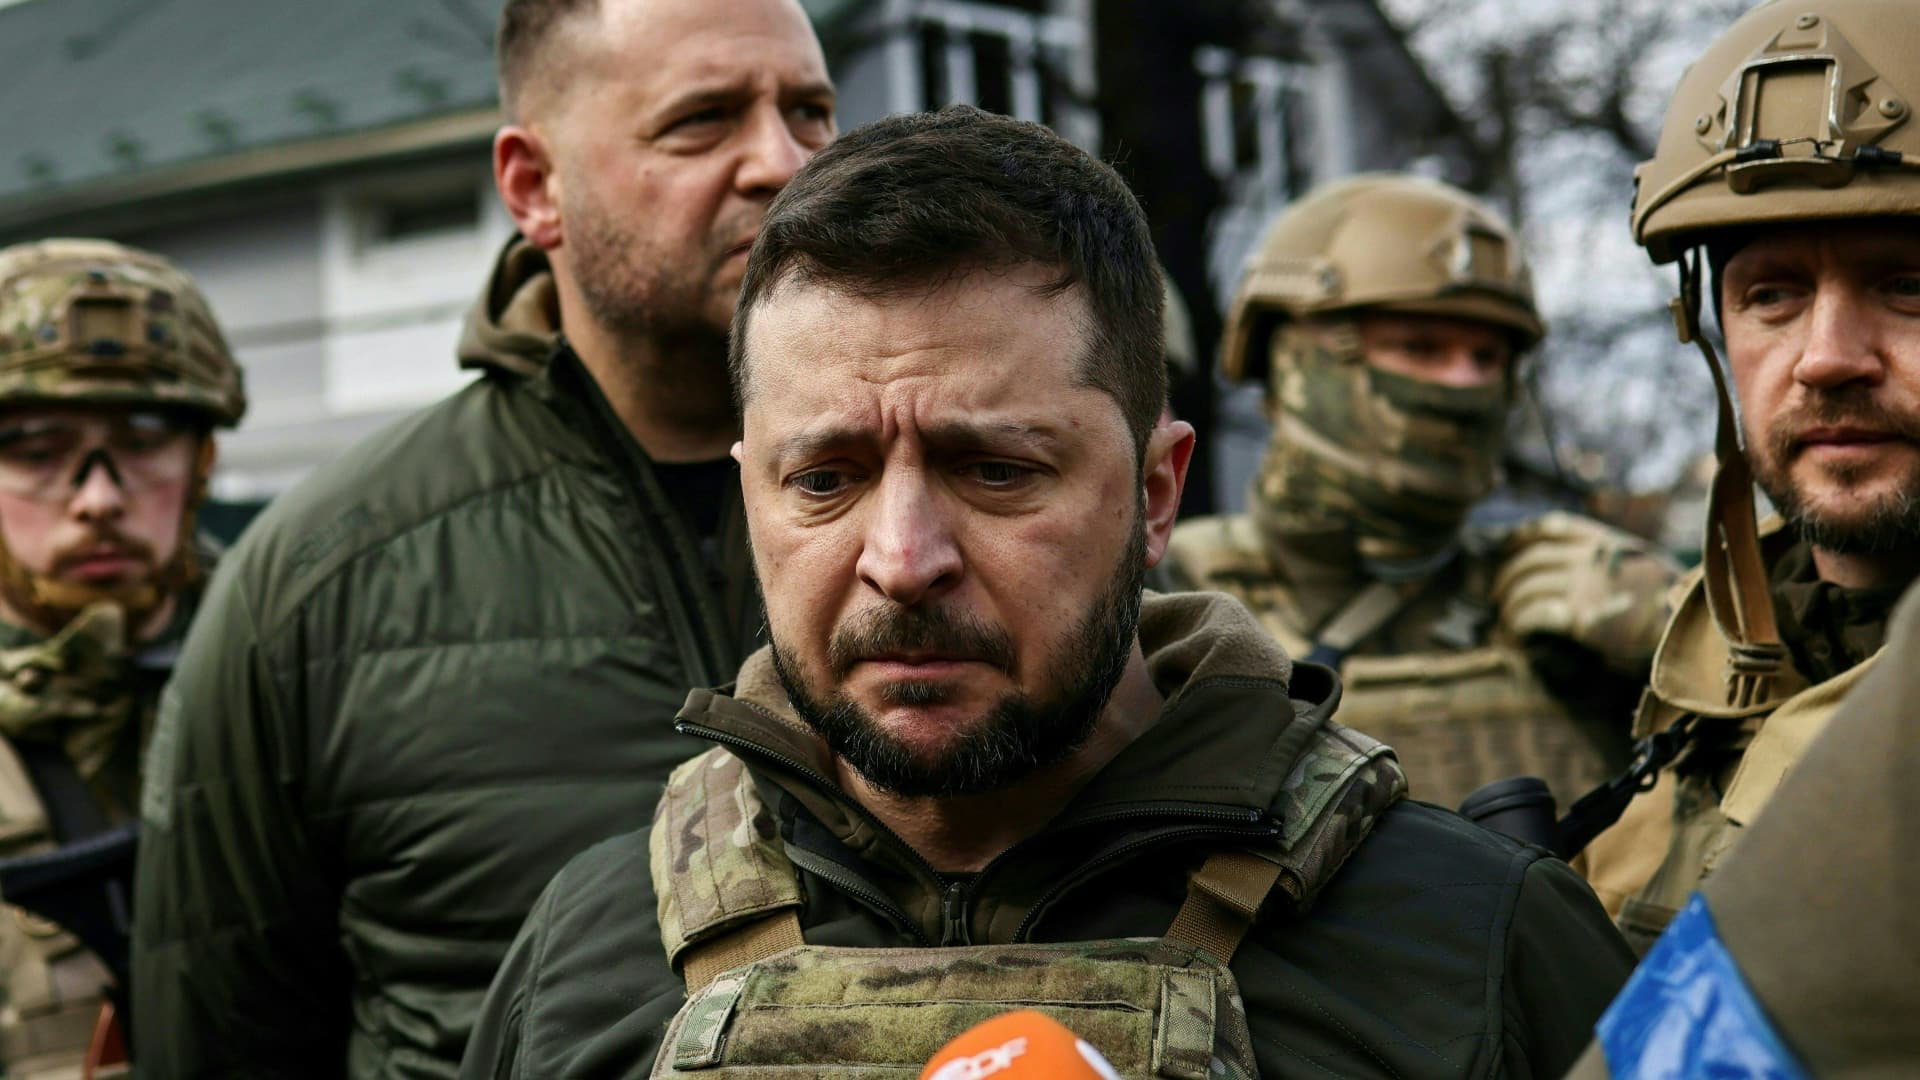 Ukraine President Volodymyr Zelenskyy said more than 300 were killed and tortured in the town of Bucha, a suburb near the capital of Kyiv.